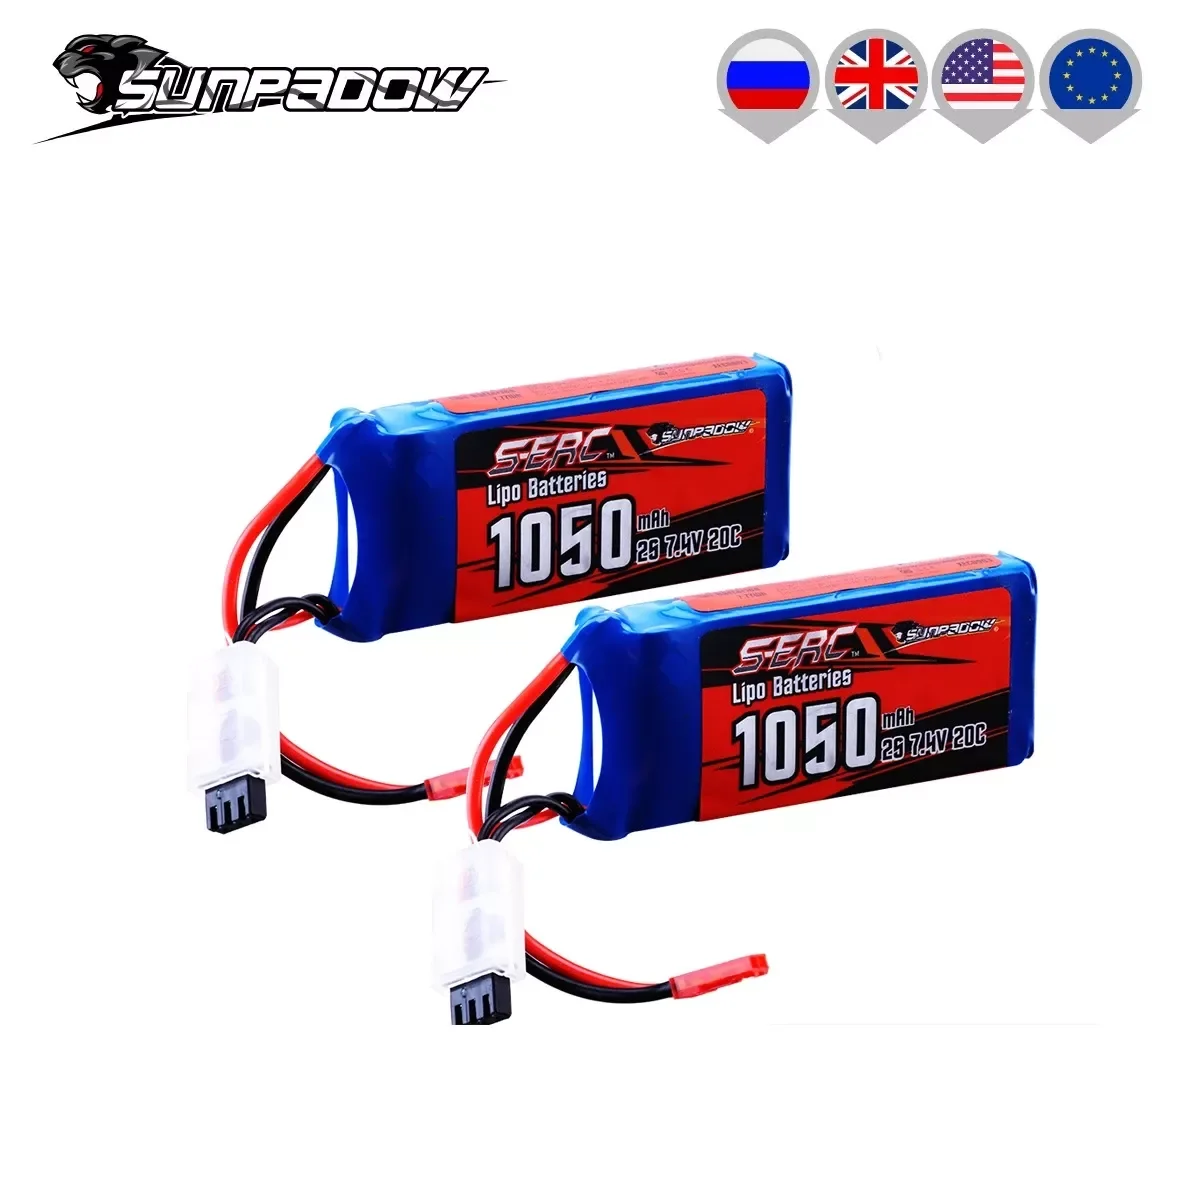 

NEW 2S 7.4V Lipo Battery 1050mAh 20C with JST Plug for RC Airplane Quadcopter Helicopter Drone FPV Model Racing 2pcs